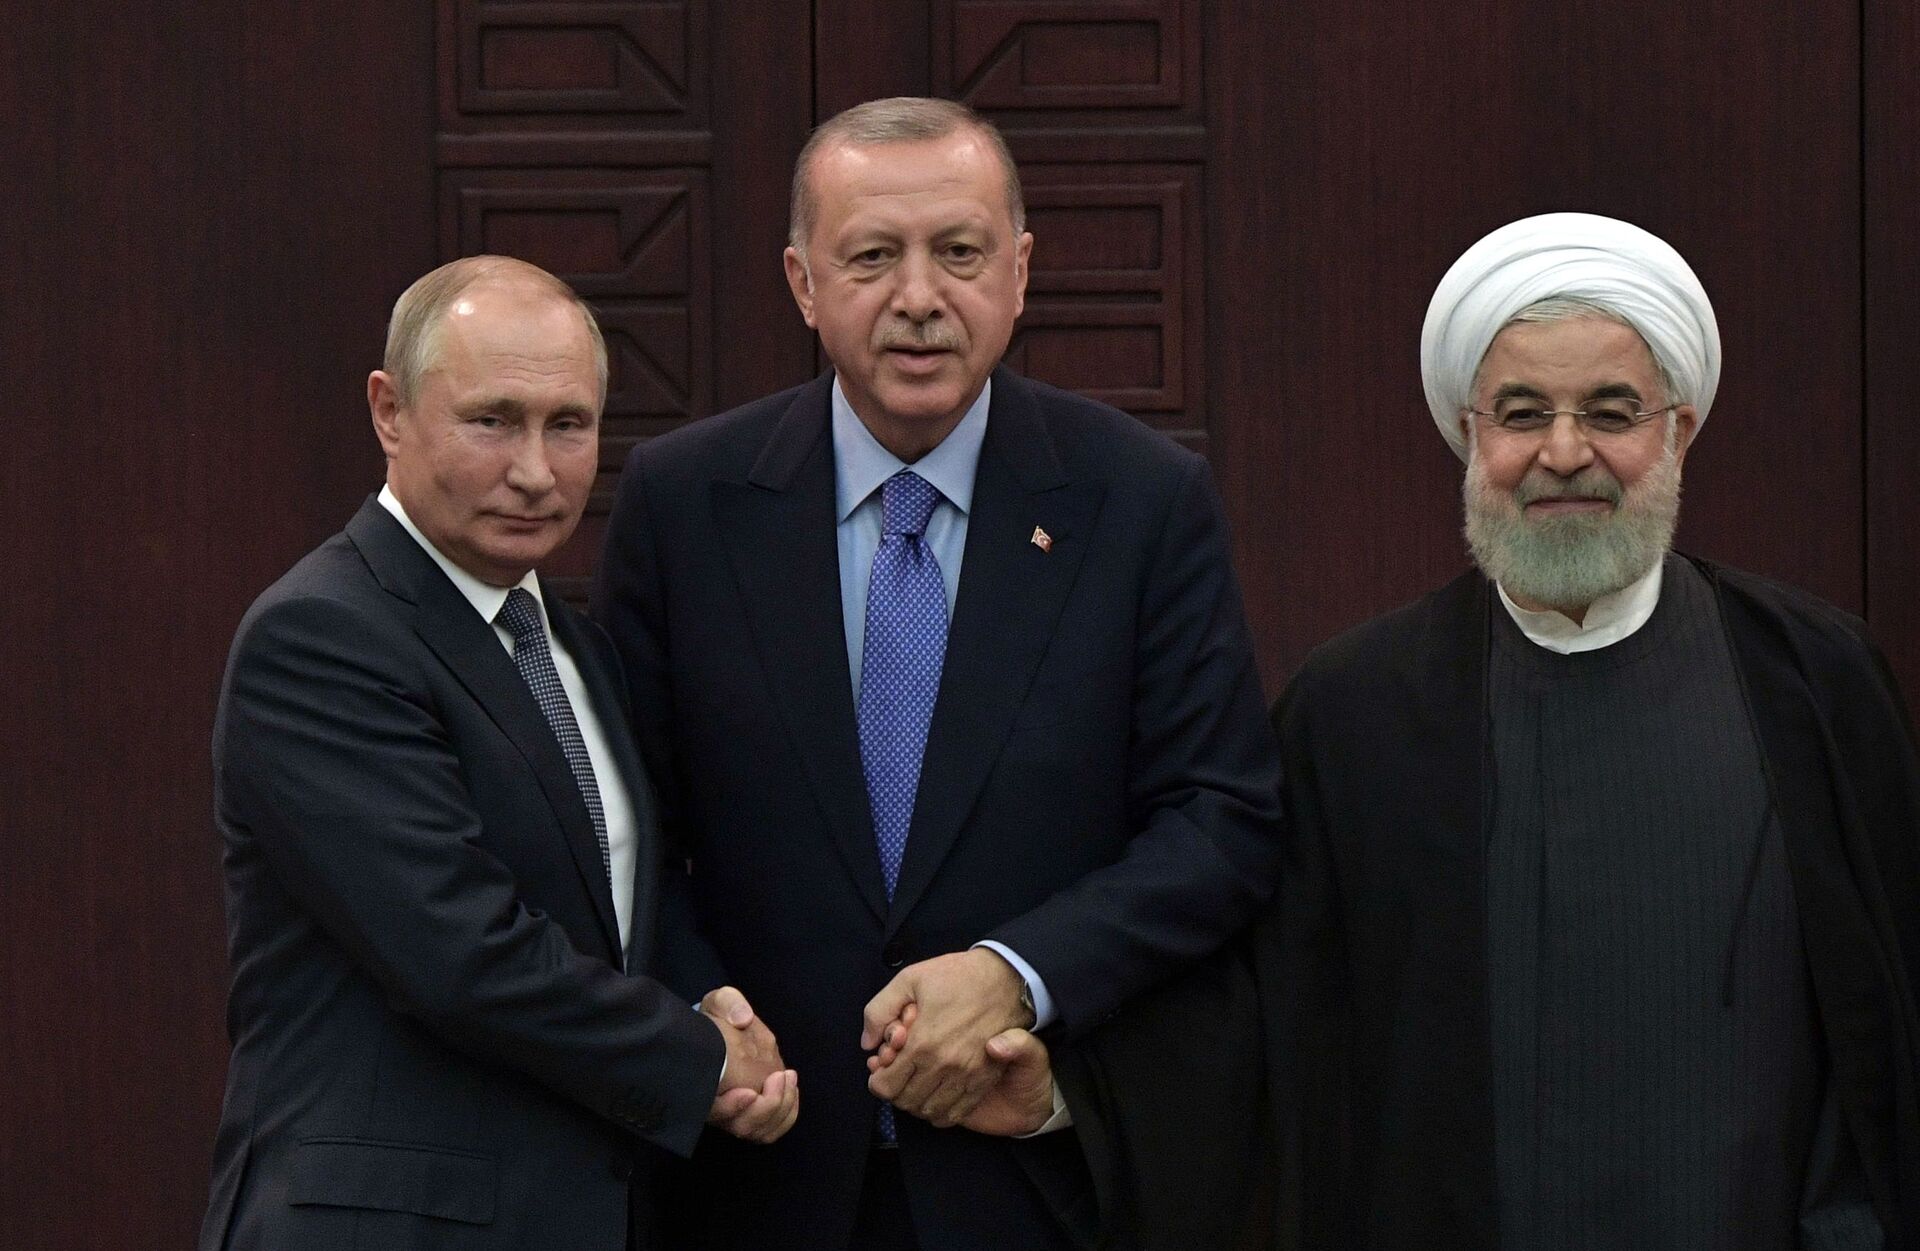 President of Russia Vladimir Putin, Turkish President Recep Tayyip Erdogan and Iranian President Hassan Rouhani during a joint press conference after the 5th Trilateral Summit in Astana format on the Syrian crisis   - Sputnik International, 1920, 24.11.2022